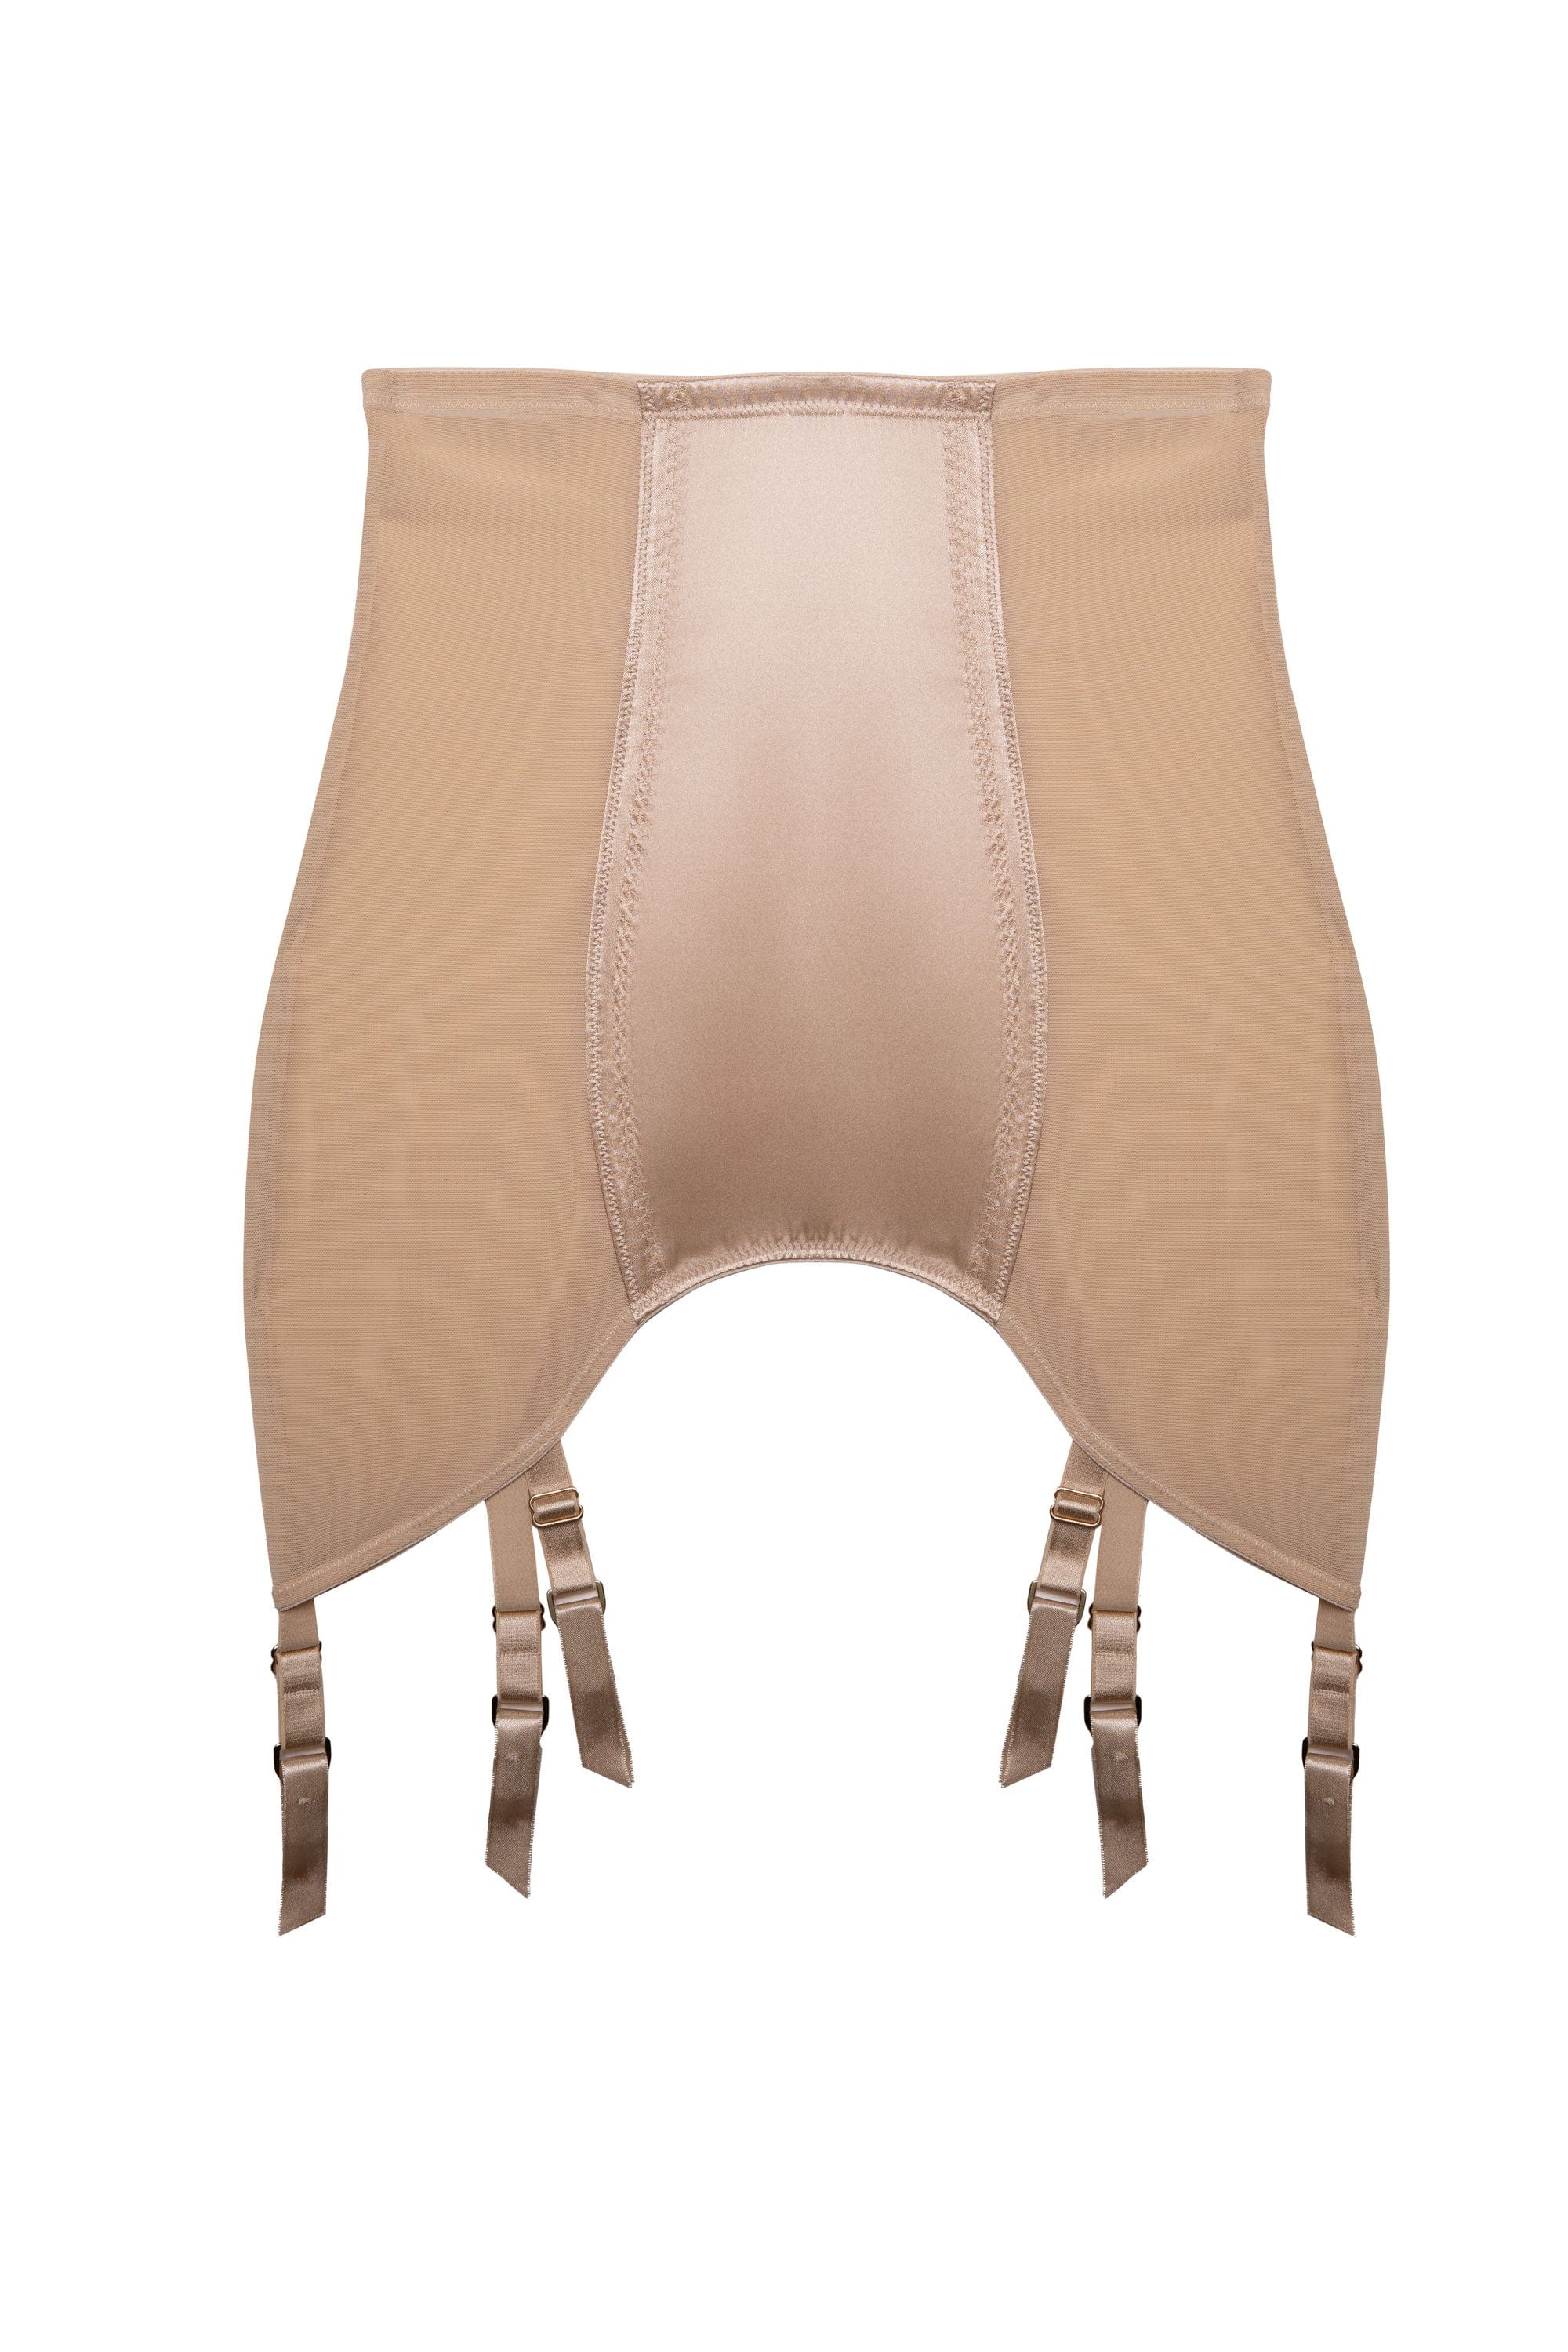 Bettie Page Champagne Satin Girdle